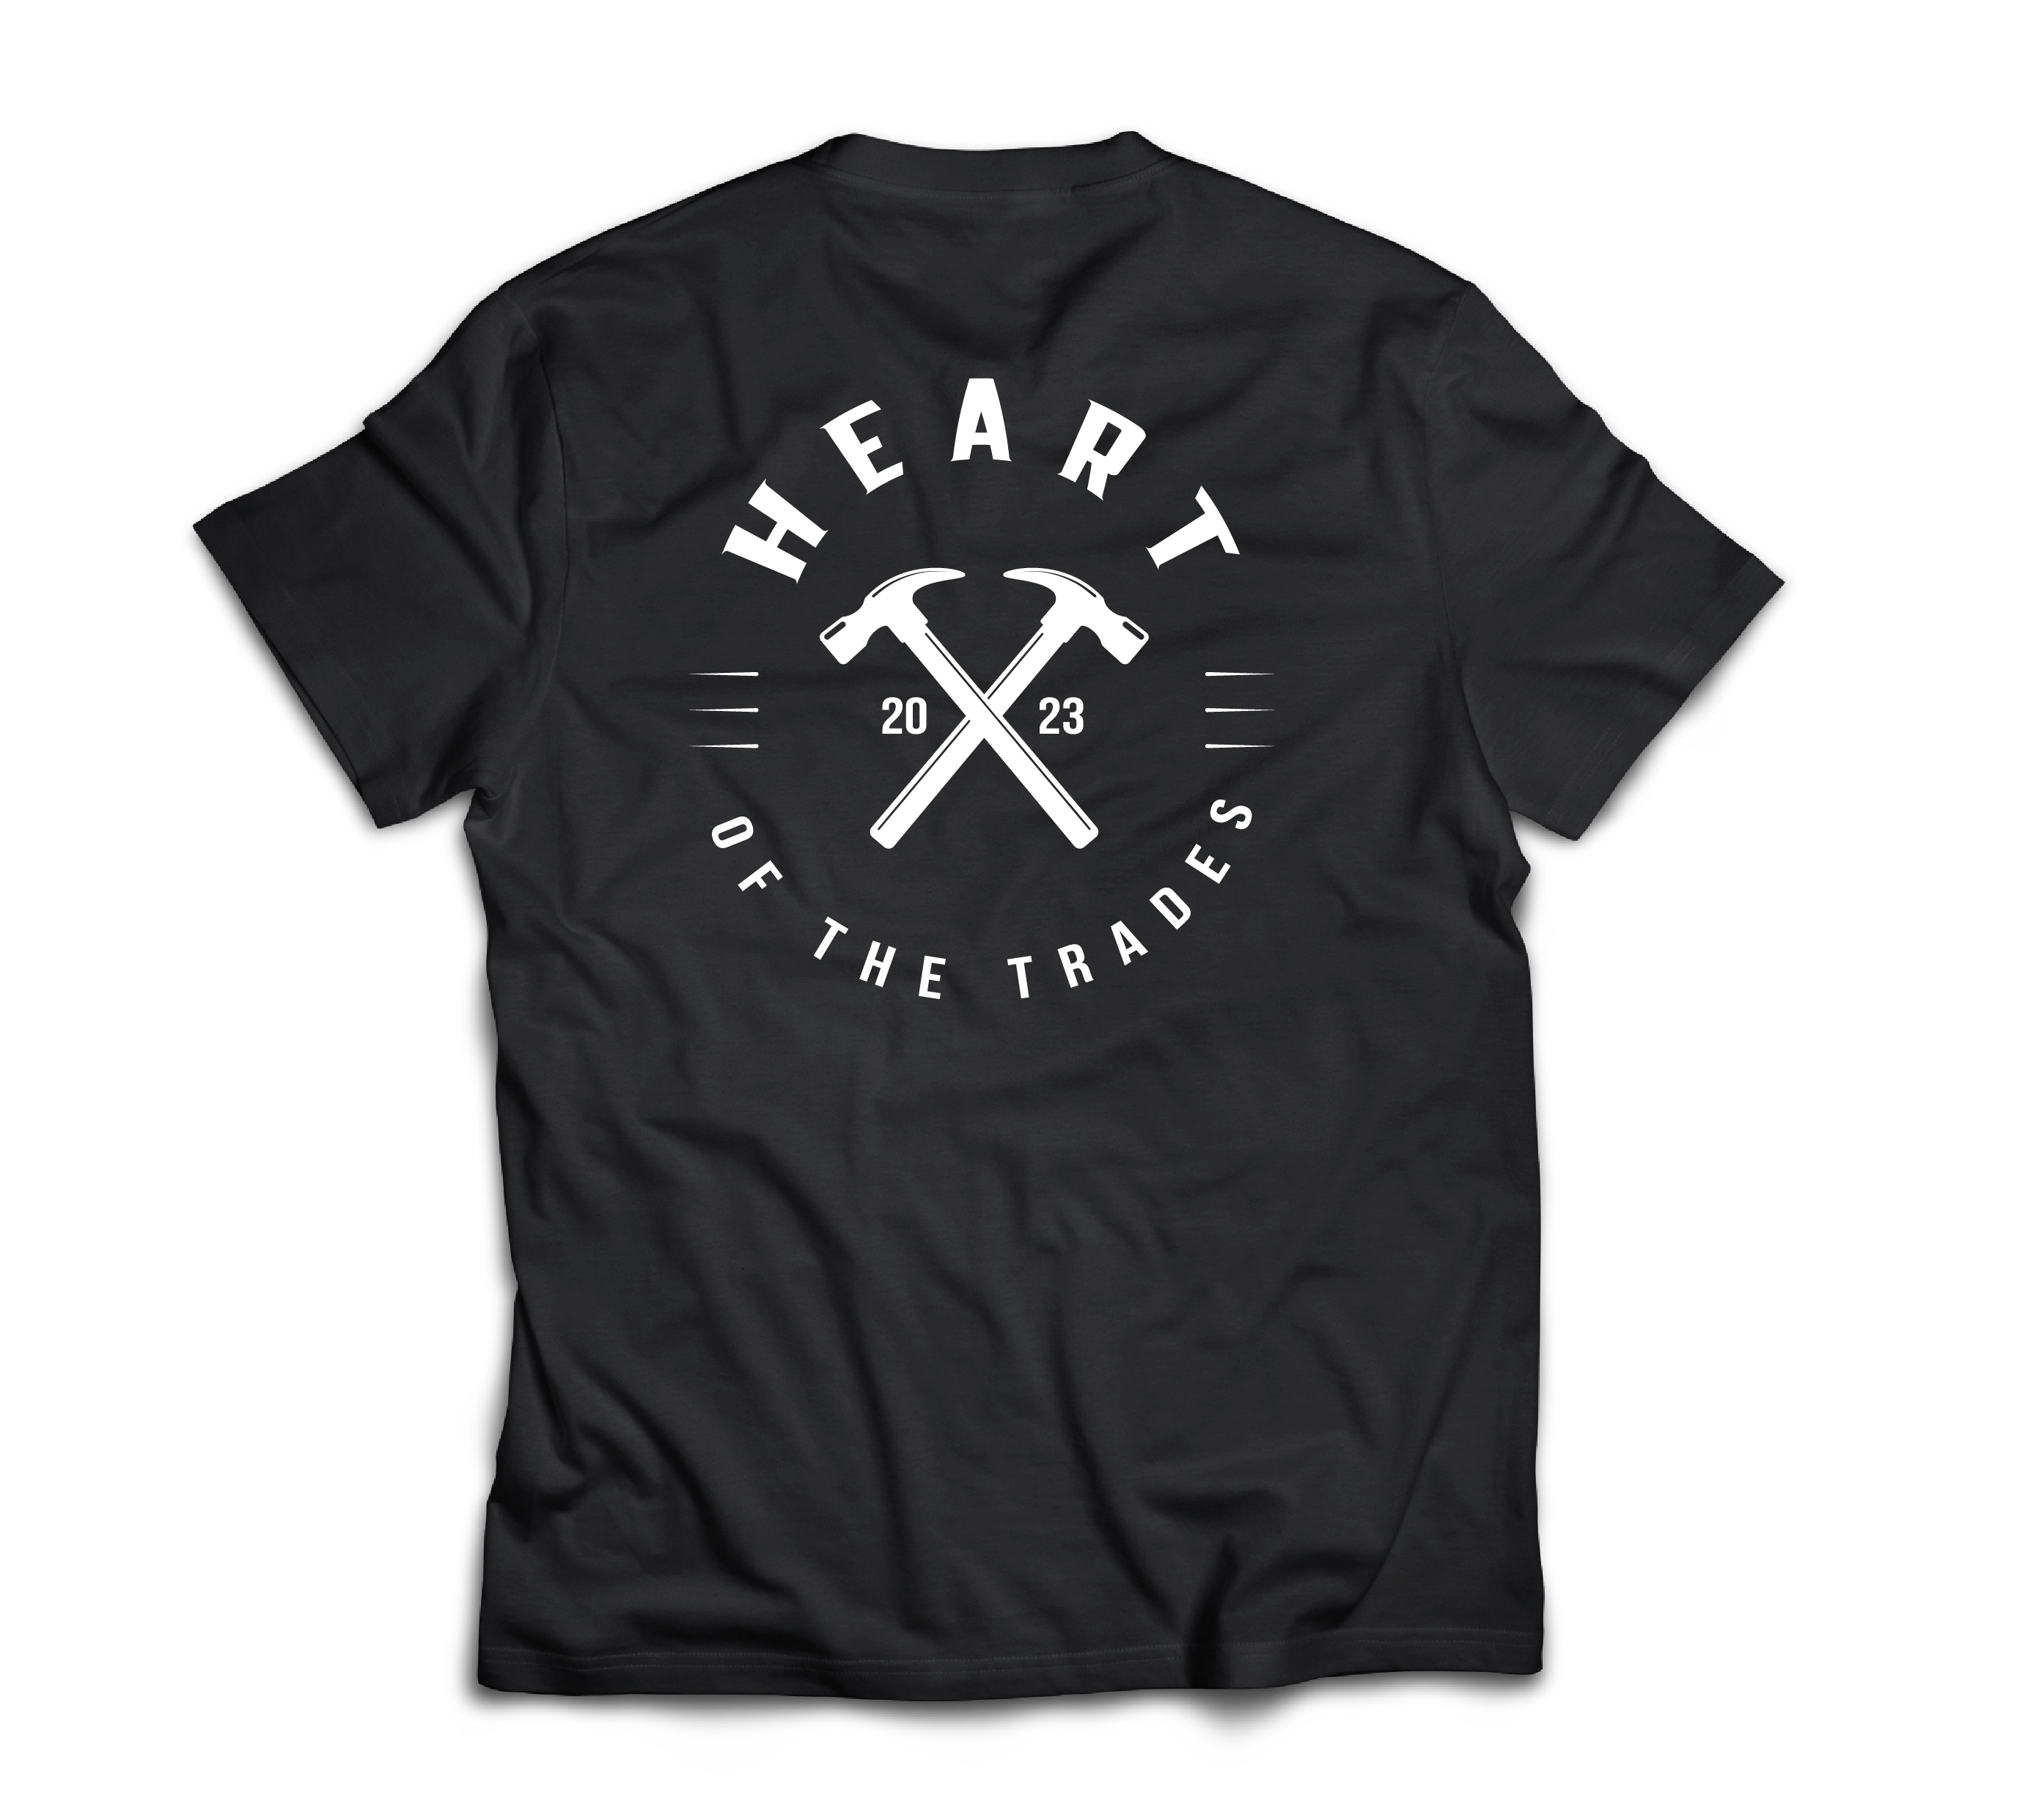 Heart of the Trades Tee, Black